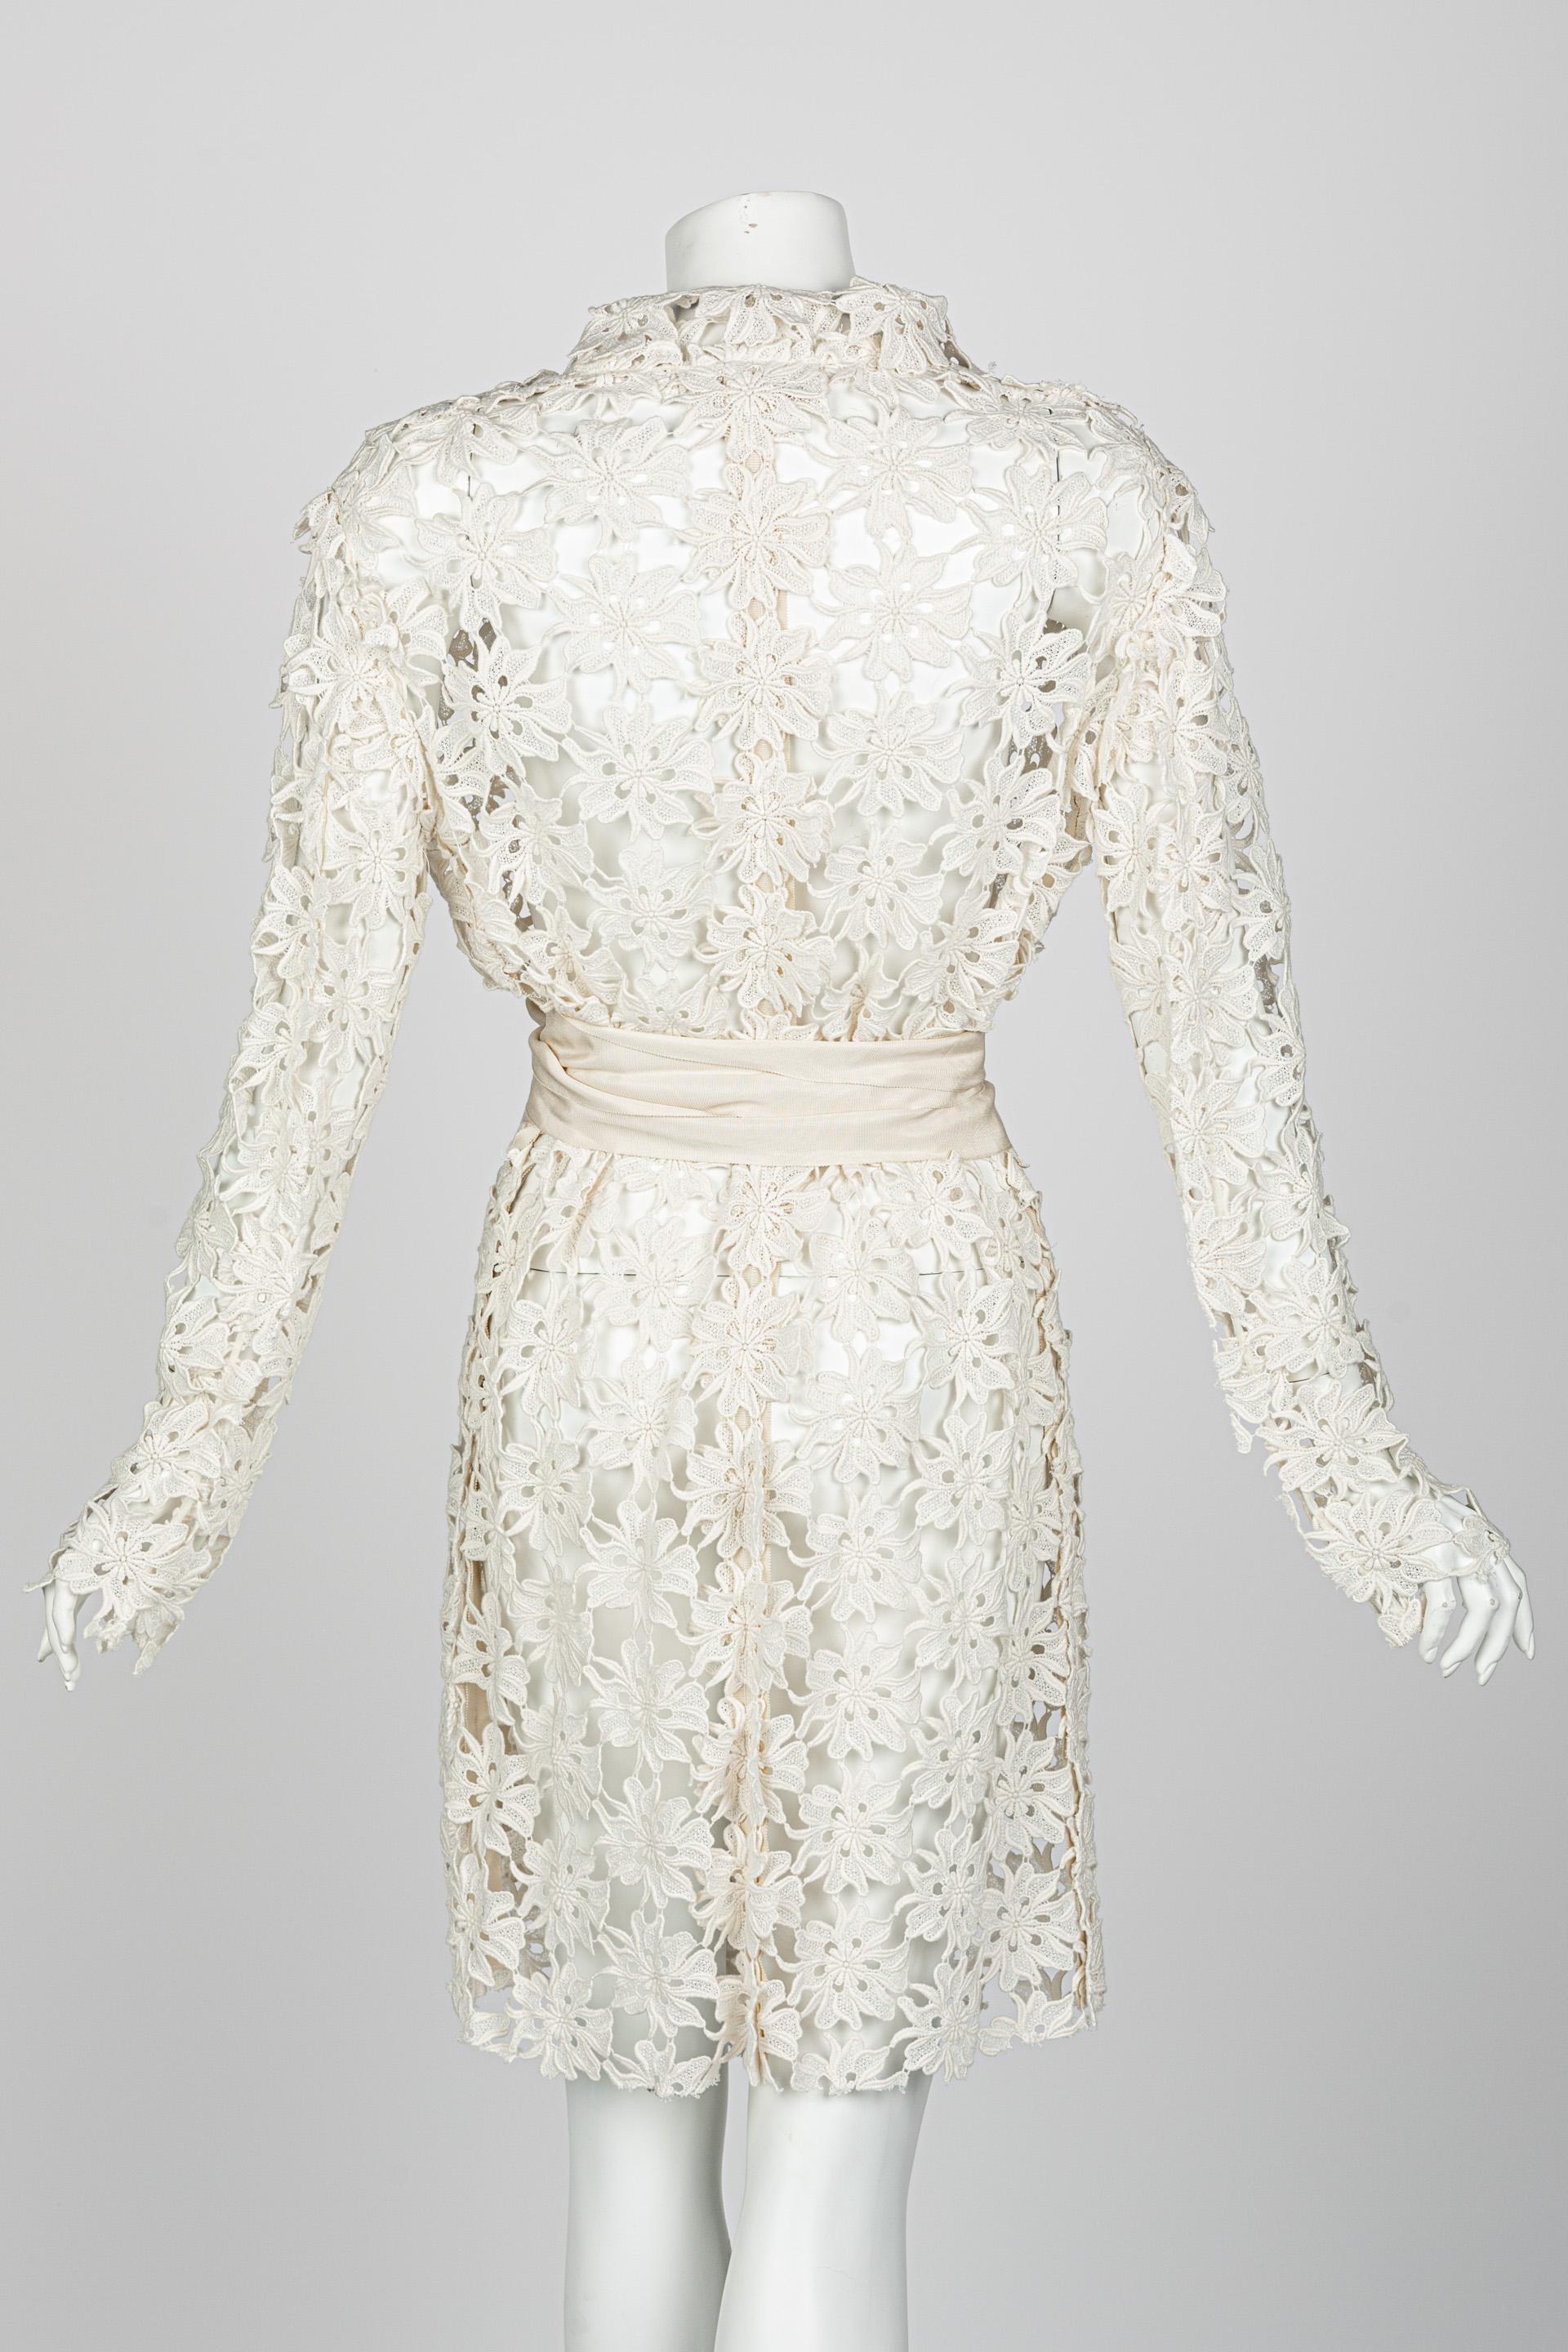 Lanvin Alber Elbaz Collection Blanche Ivory Guipure Lace Coat 2013 In Excellent Condition In Boca Raton, FL